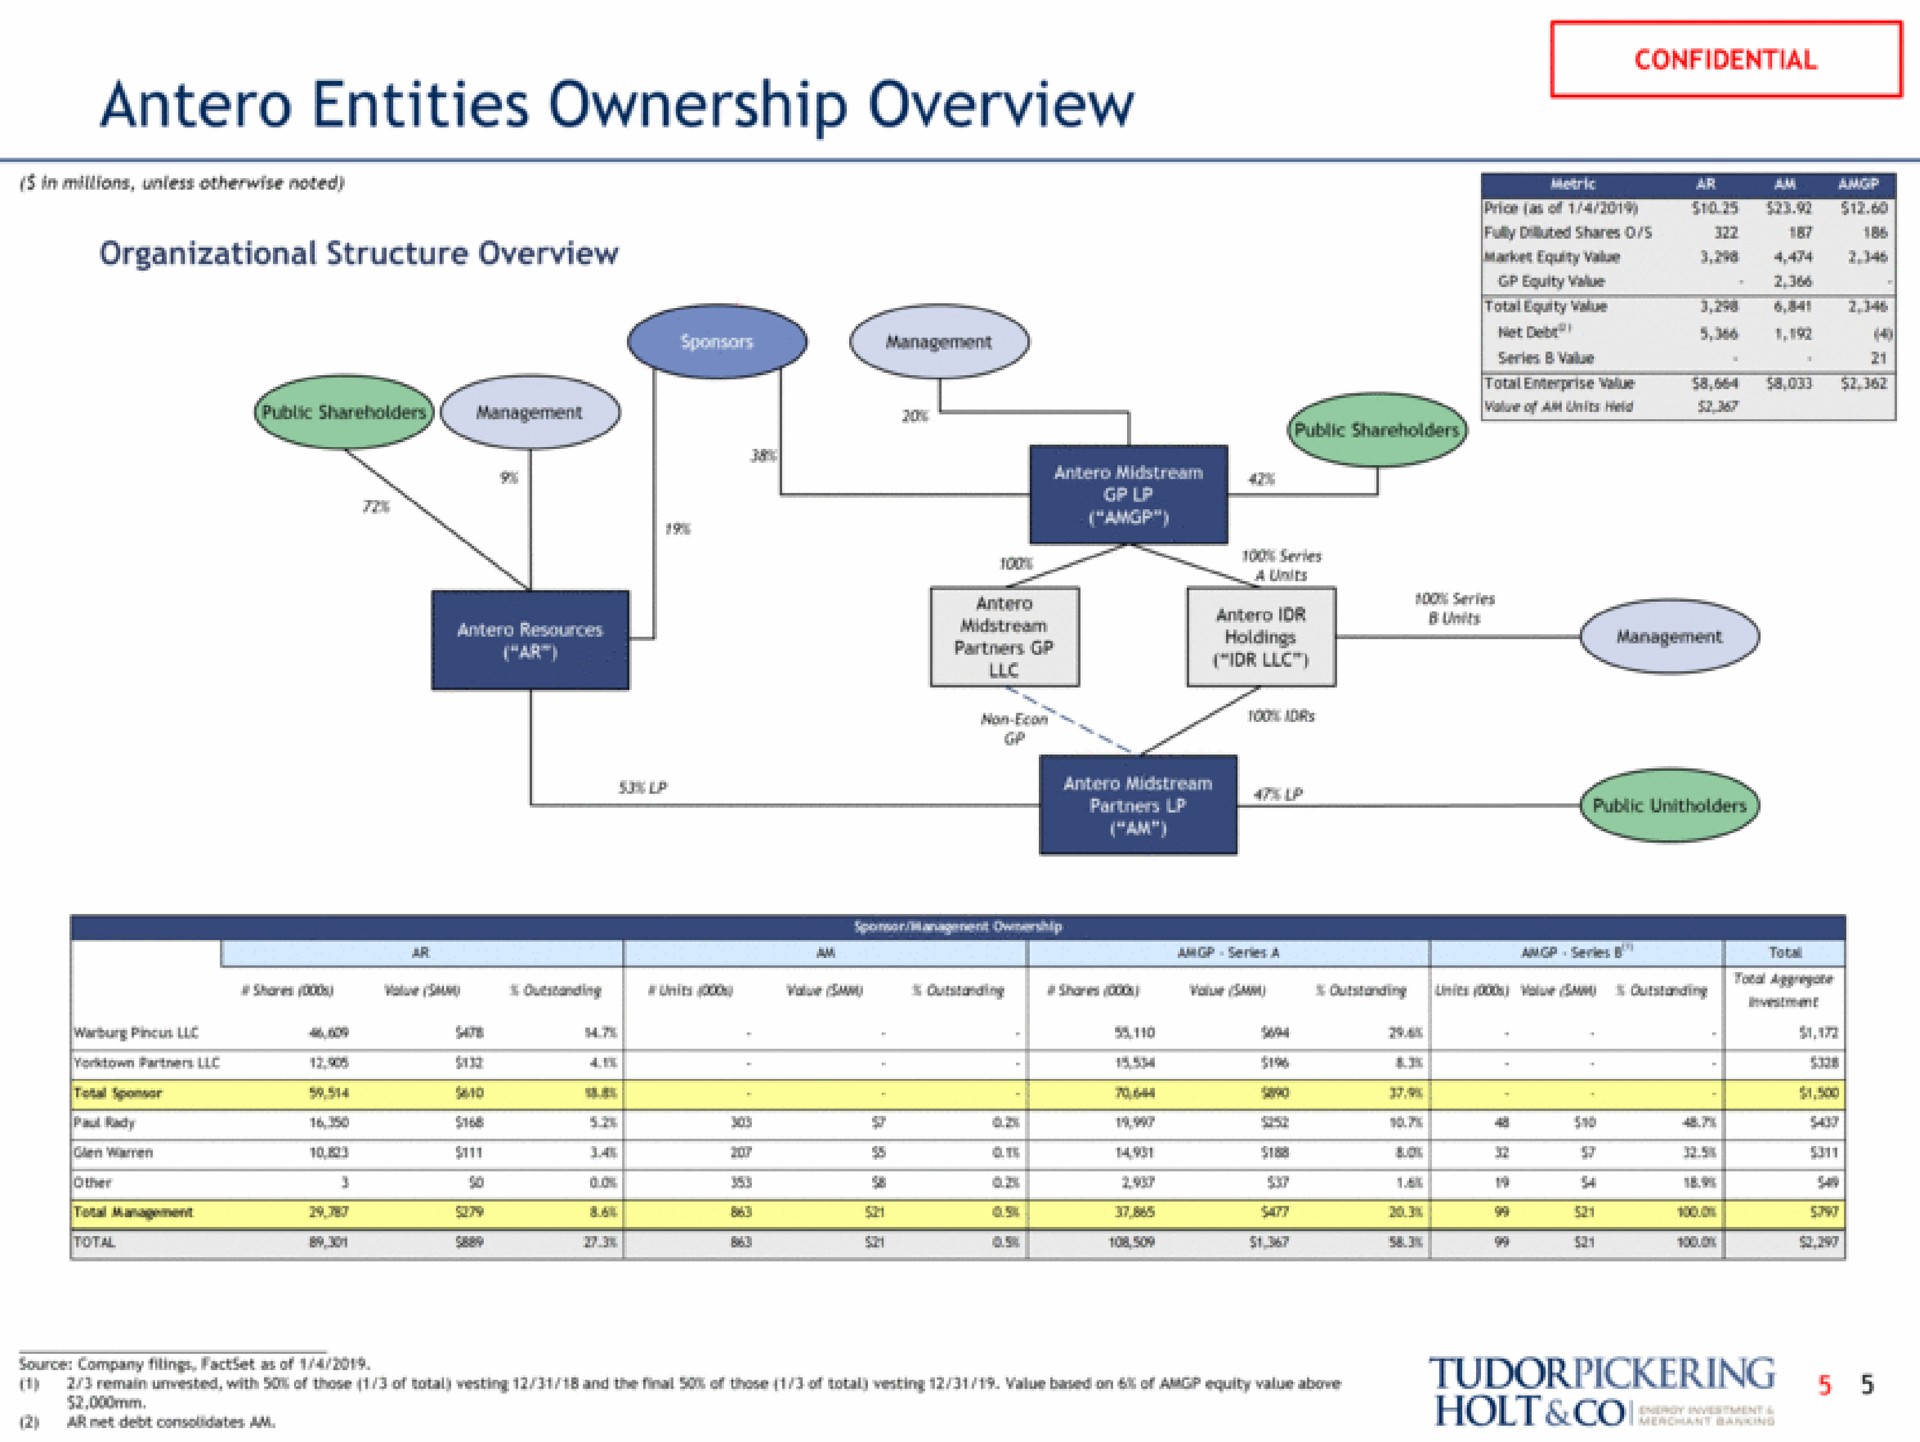 entities ownership overview of tone | Tudor, Pickering, Holt & Co